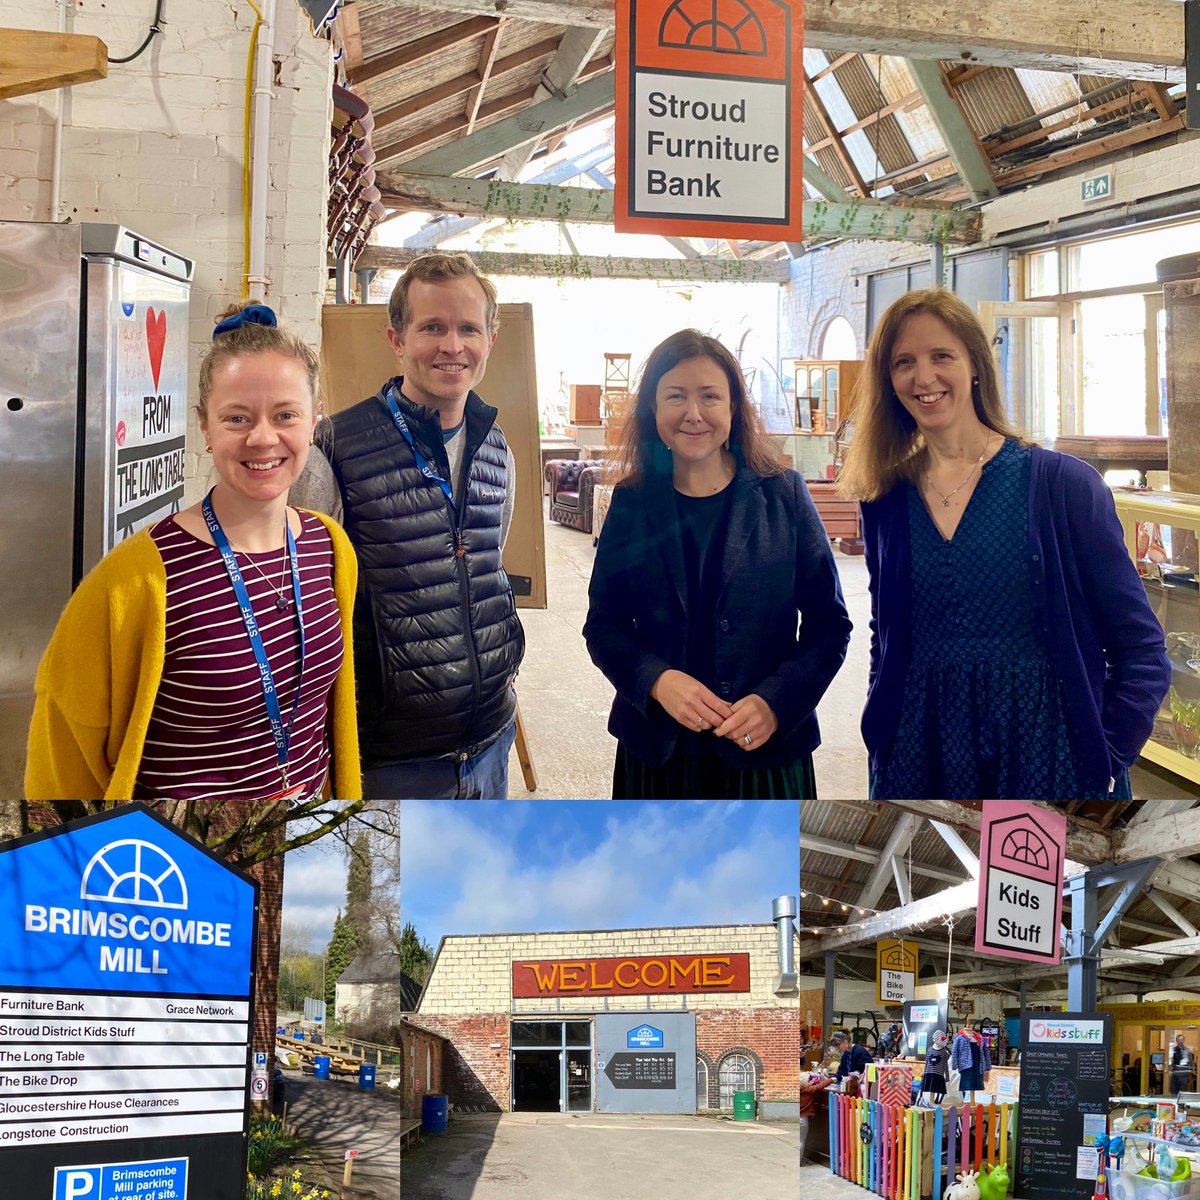 Great to meet Jo, Ed & @MinchChloe at Brimscombe Mill today, to discuss the change of ownership of the site & how we can support this inspirational group of people & community projects to secure a permanent home locally. We can't afford to lose them! brimscombe-mill.org.uk/warehouseupdate